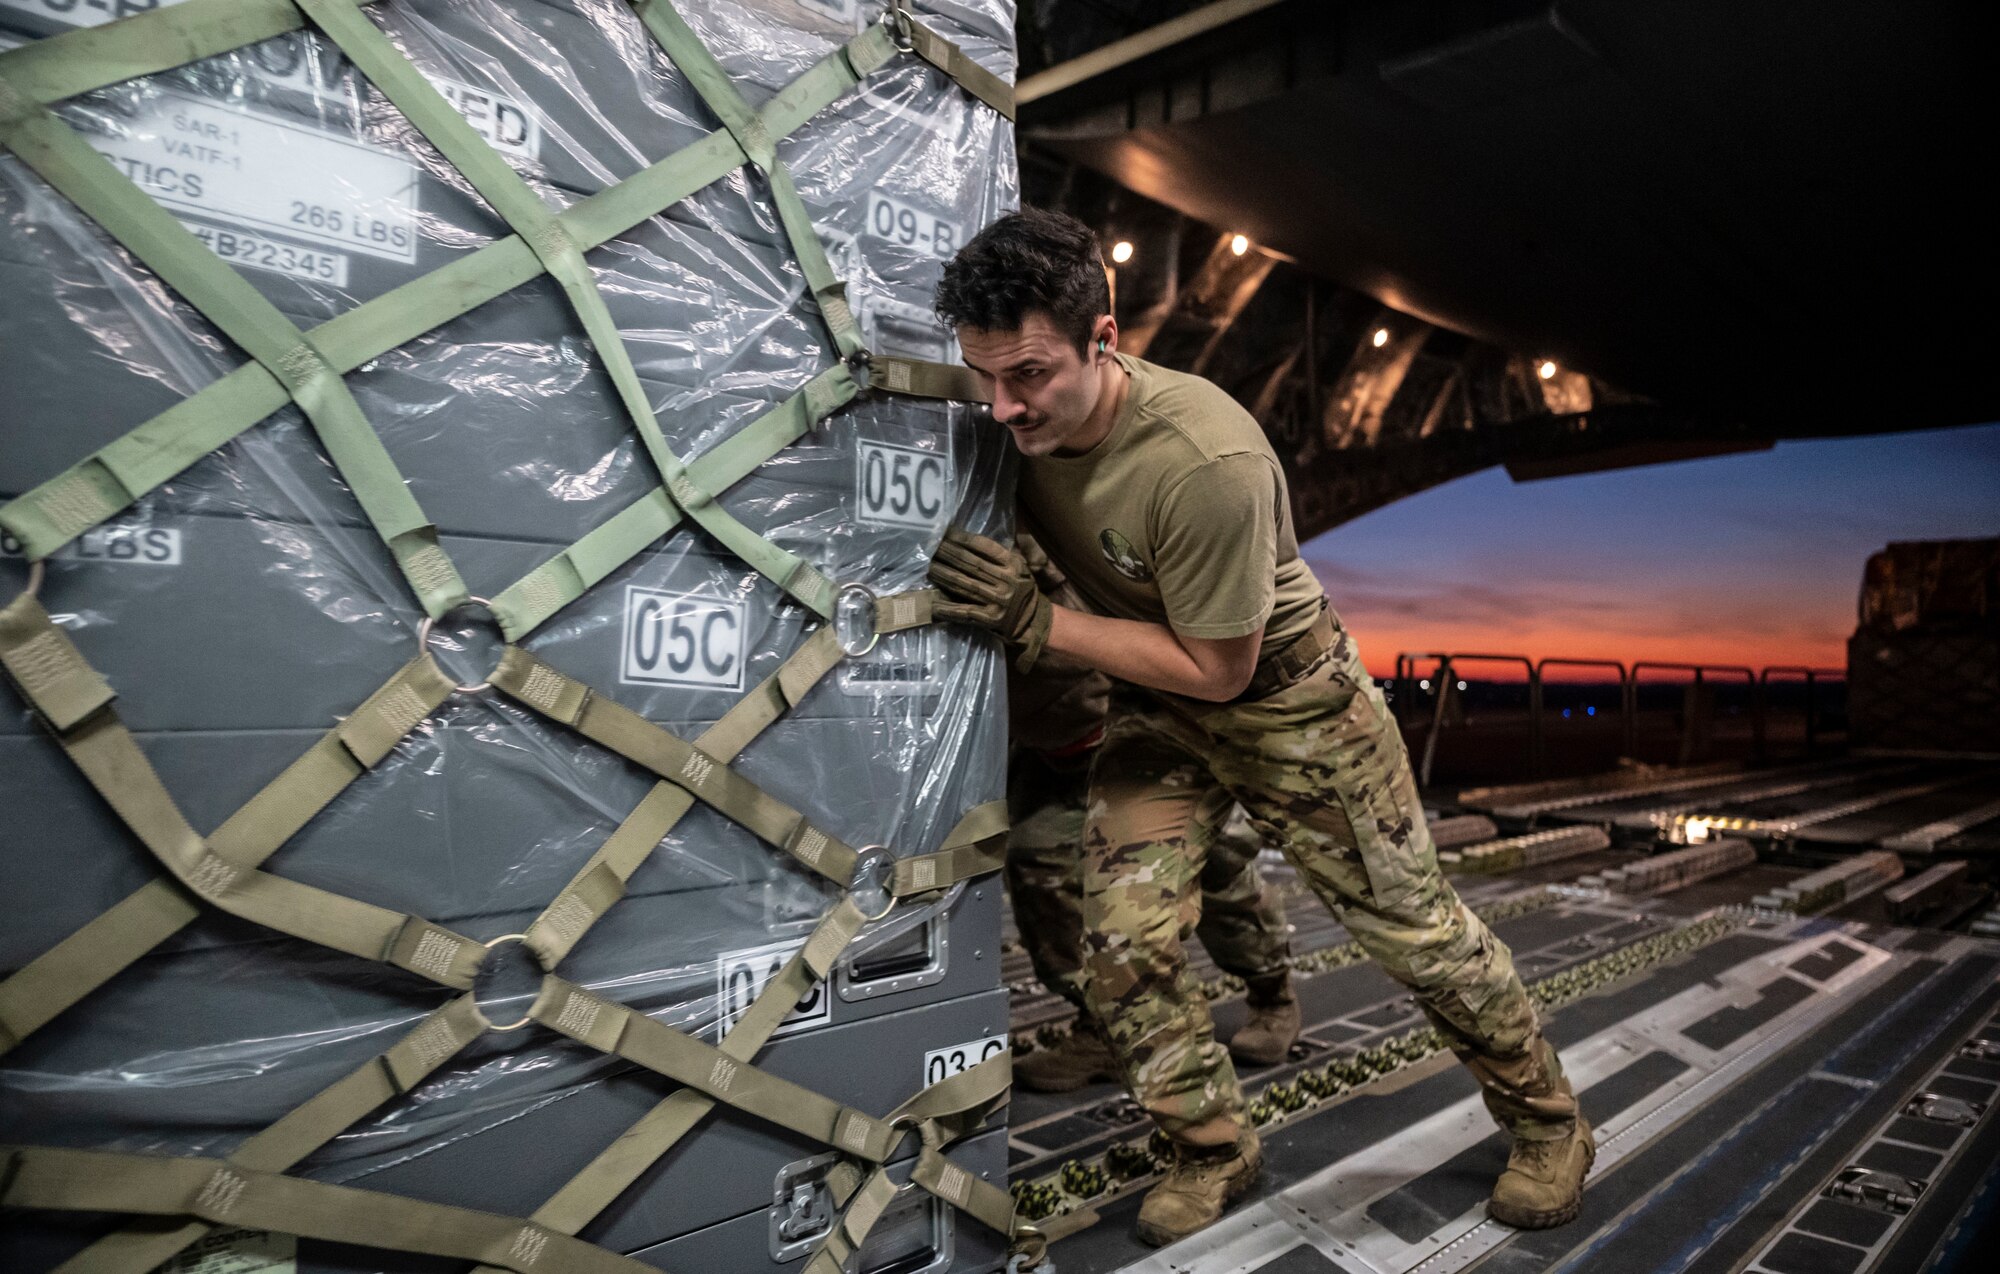 Senior Airman Garrett LaMarche, 6th Airlift Squadron loadmaster, pushes a cargo pallet onto a C-17 Globemaster III on Dover Air Force Base, Delaware, Feb. 7, 2023. The U.S. Agency for International Development (USAID) is mobilizing emergency humanitarian assistance to respond to the devastating impacts in Türkiye following the worst earthquake to hit the region in almost a century. (U.S. Air Force photo by Staff Sgt. Marco A. Gomez)